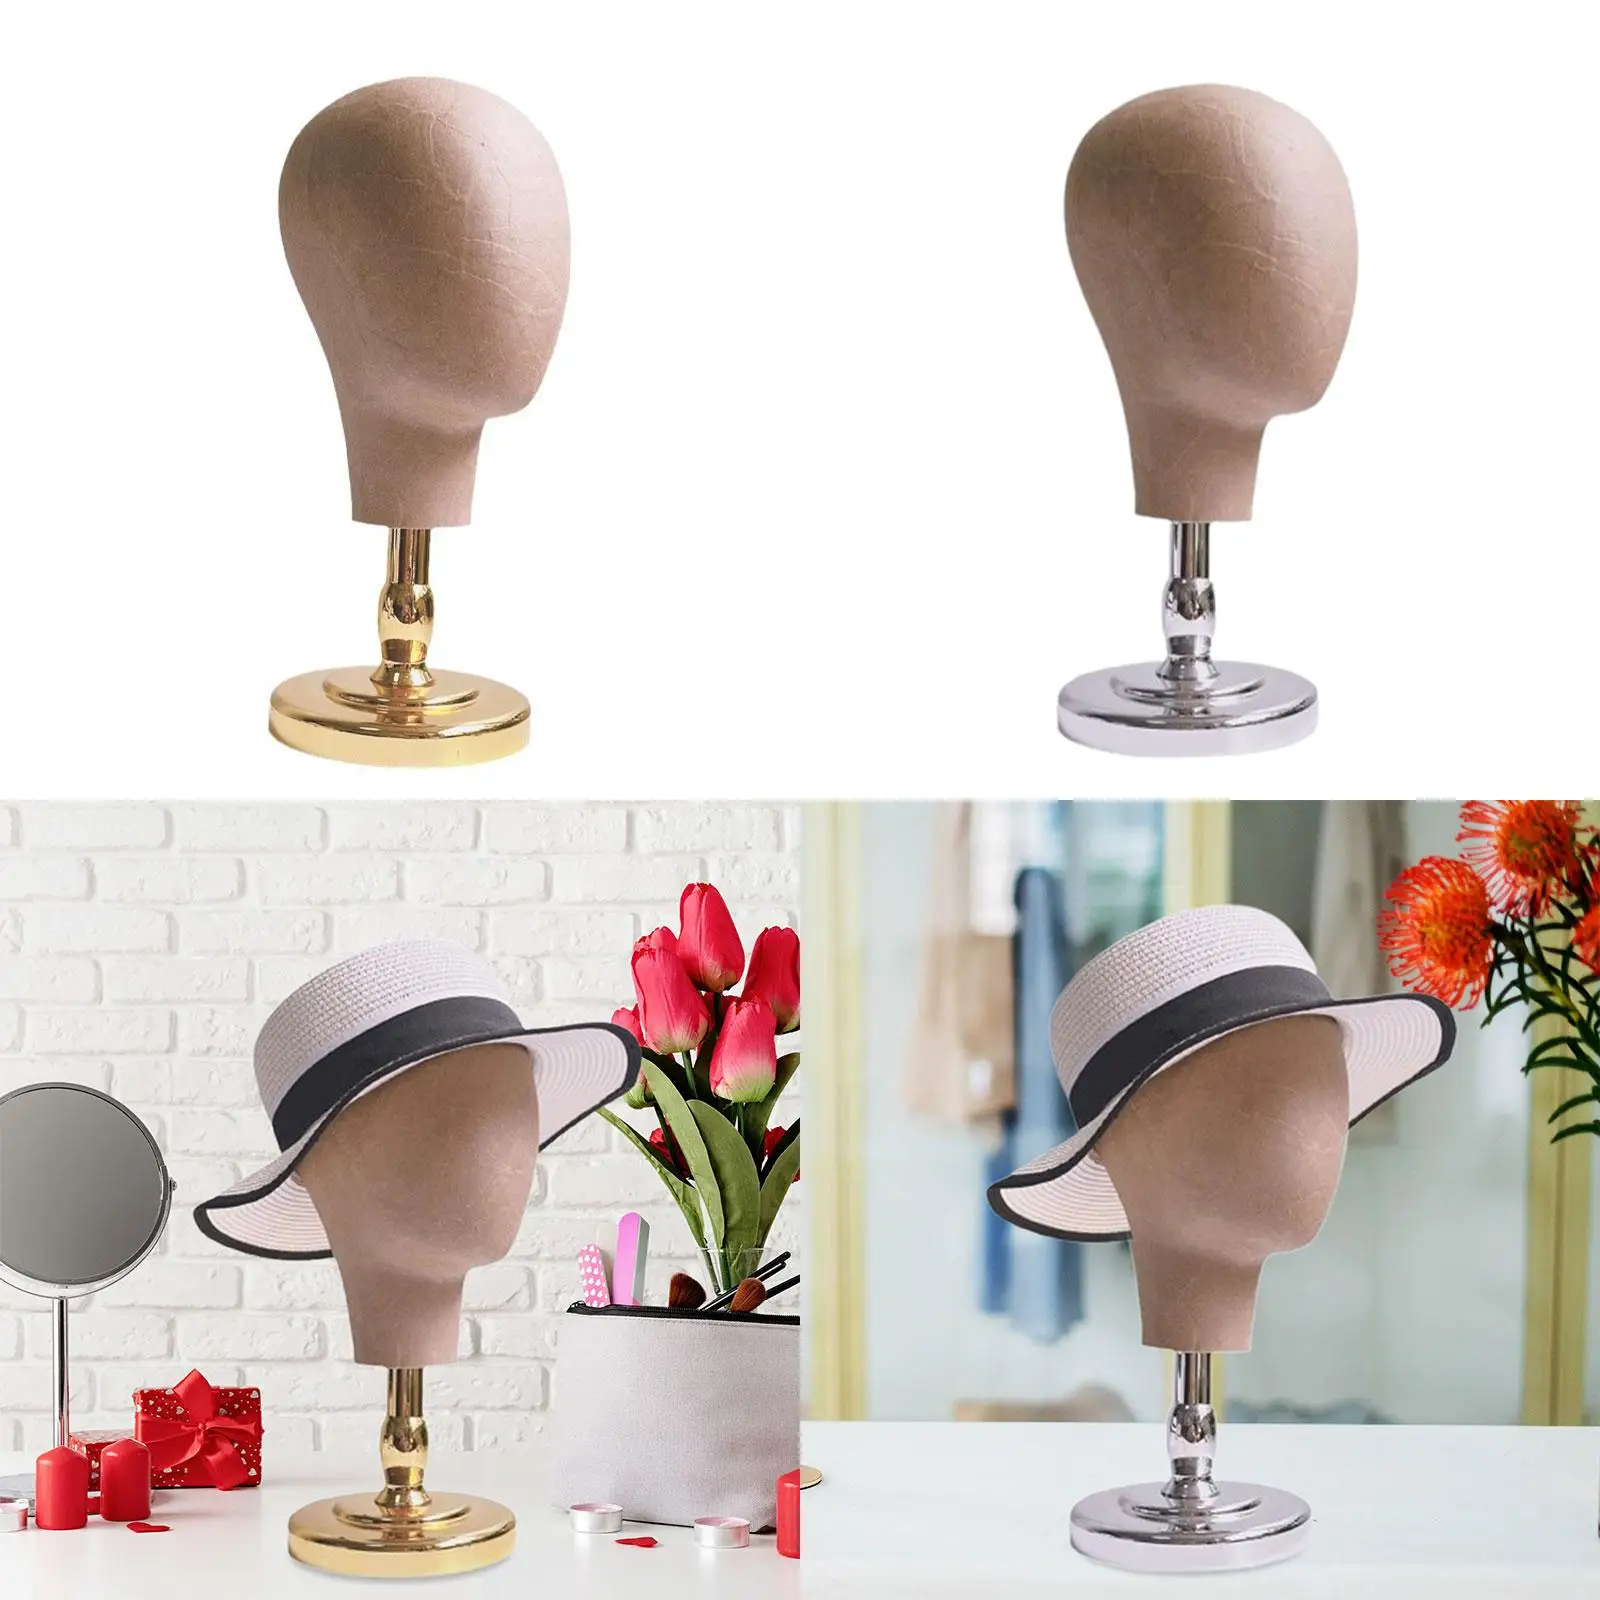 

Mannequin Head Stand for Hats Wig Head Holder Cap Display Rack for Stylists Cowboy Hats Shopping Mall Cosmetology Hairdressing